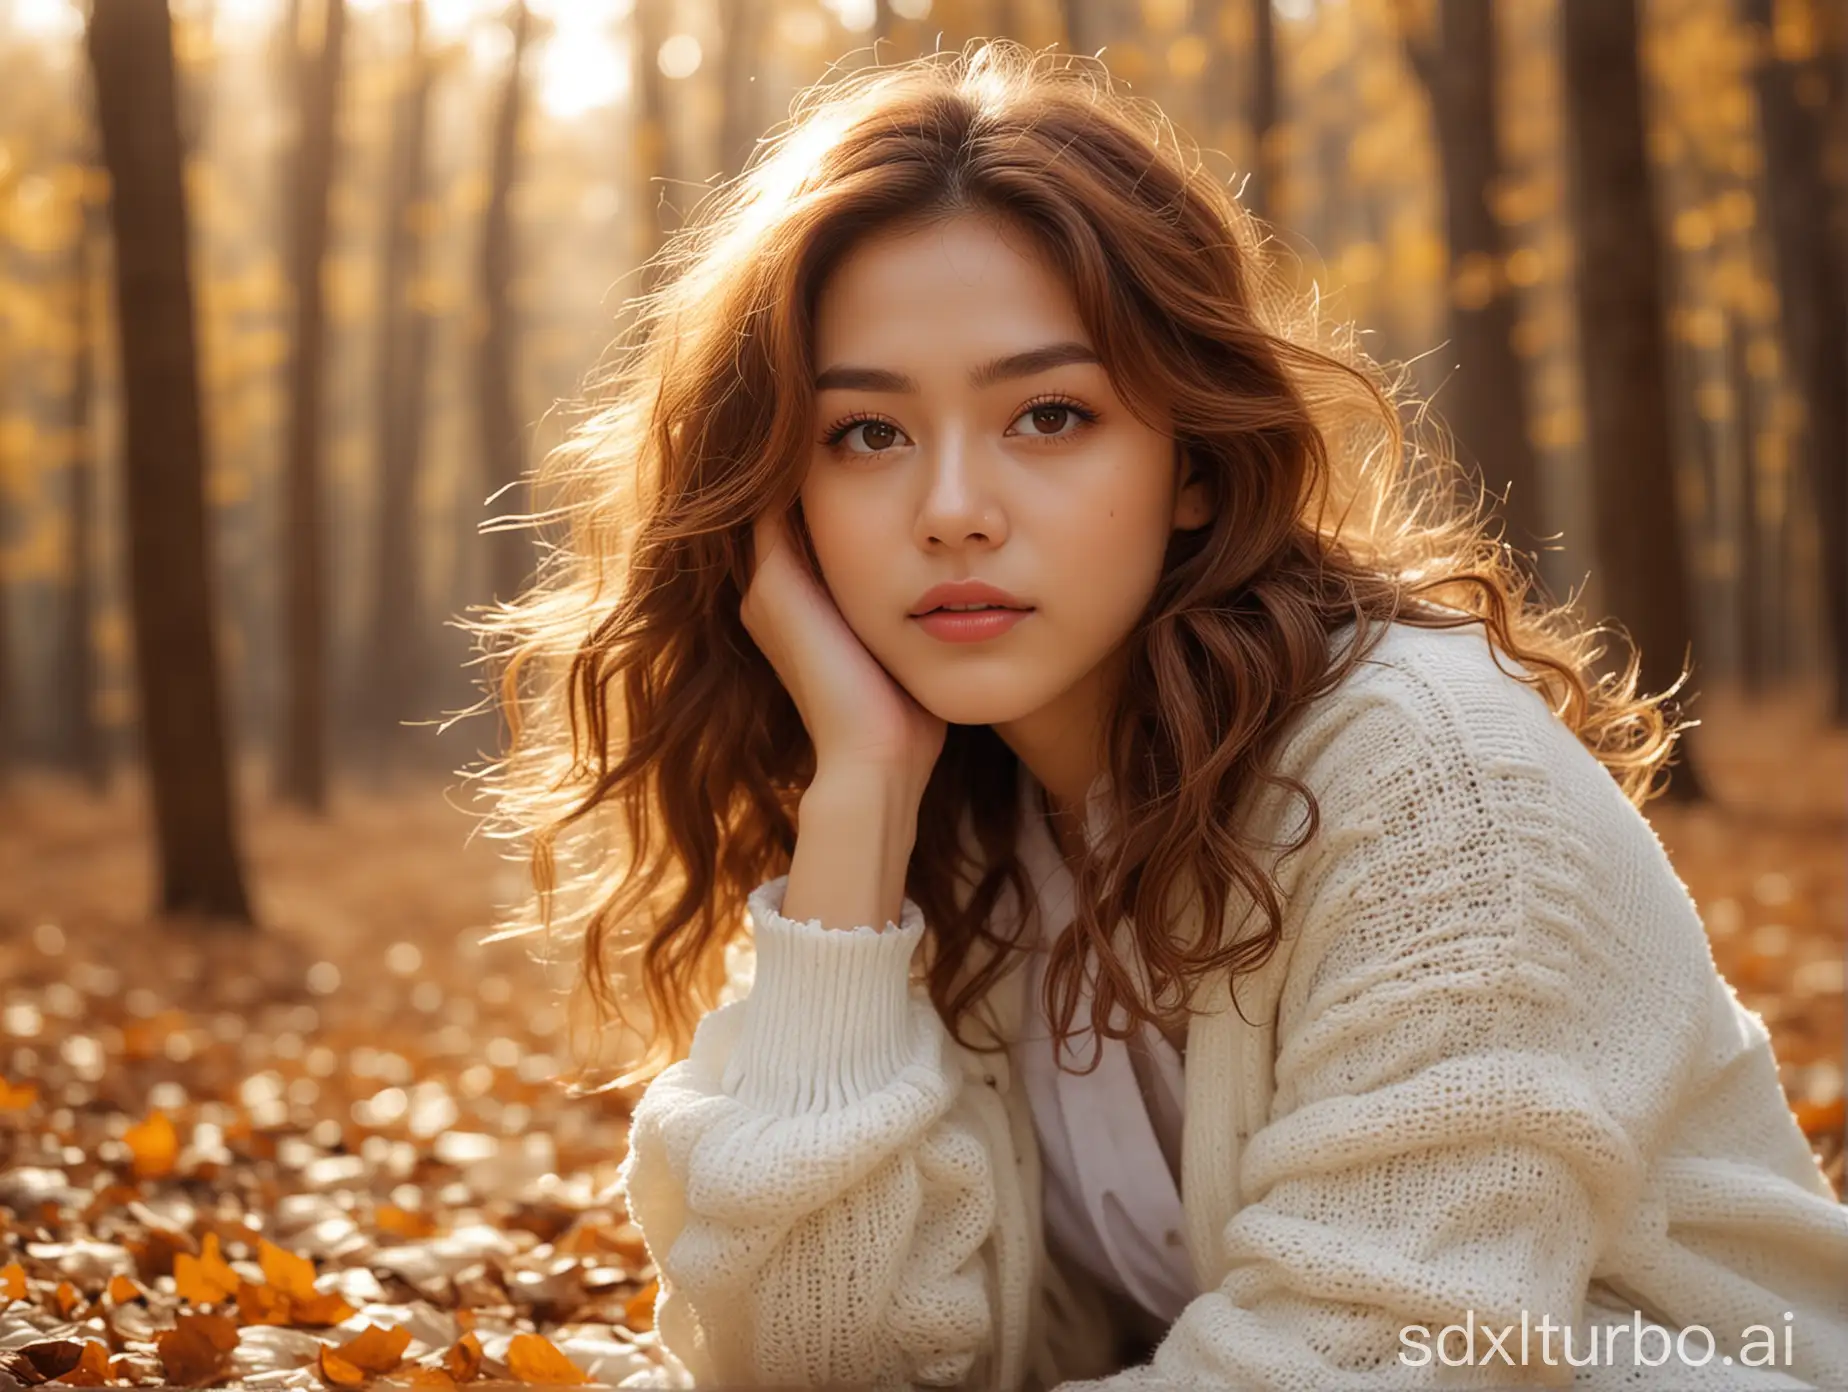 A girl wearing a white knitted cardigan squats and looks at the camera, with brown shiny hair, slightly curly, clean makeup, breeze, golden woods and fallen leaves, hazy feeling, blurred background, Canon shot, portrait photo, style reference Ouyang Nana